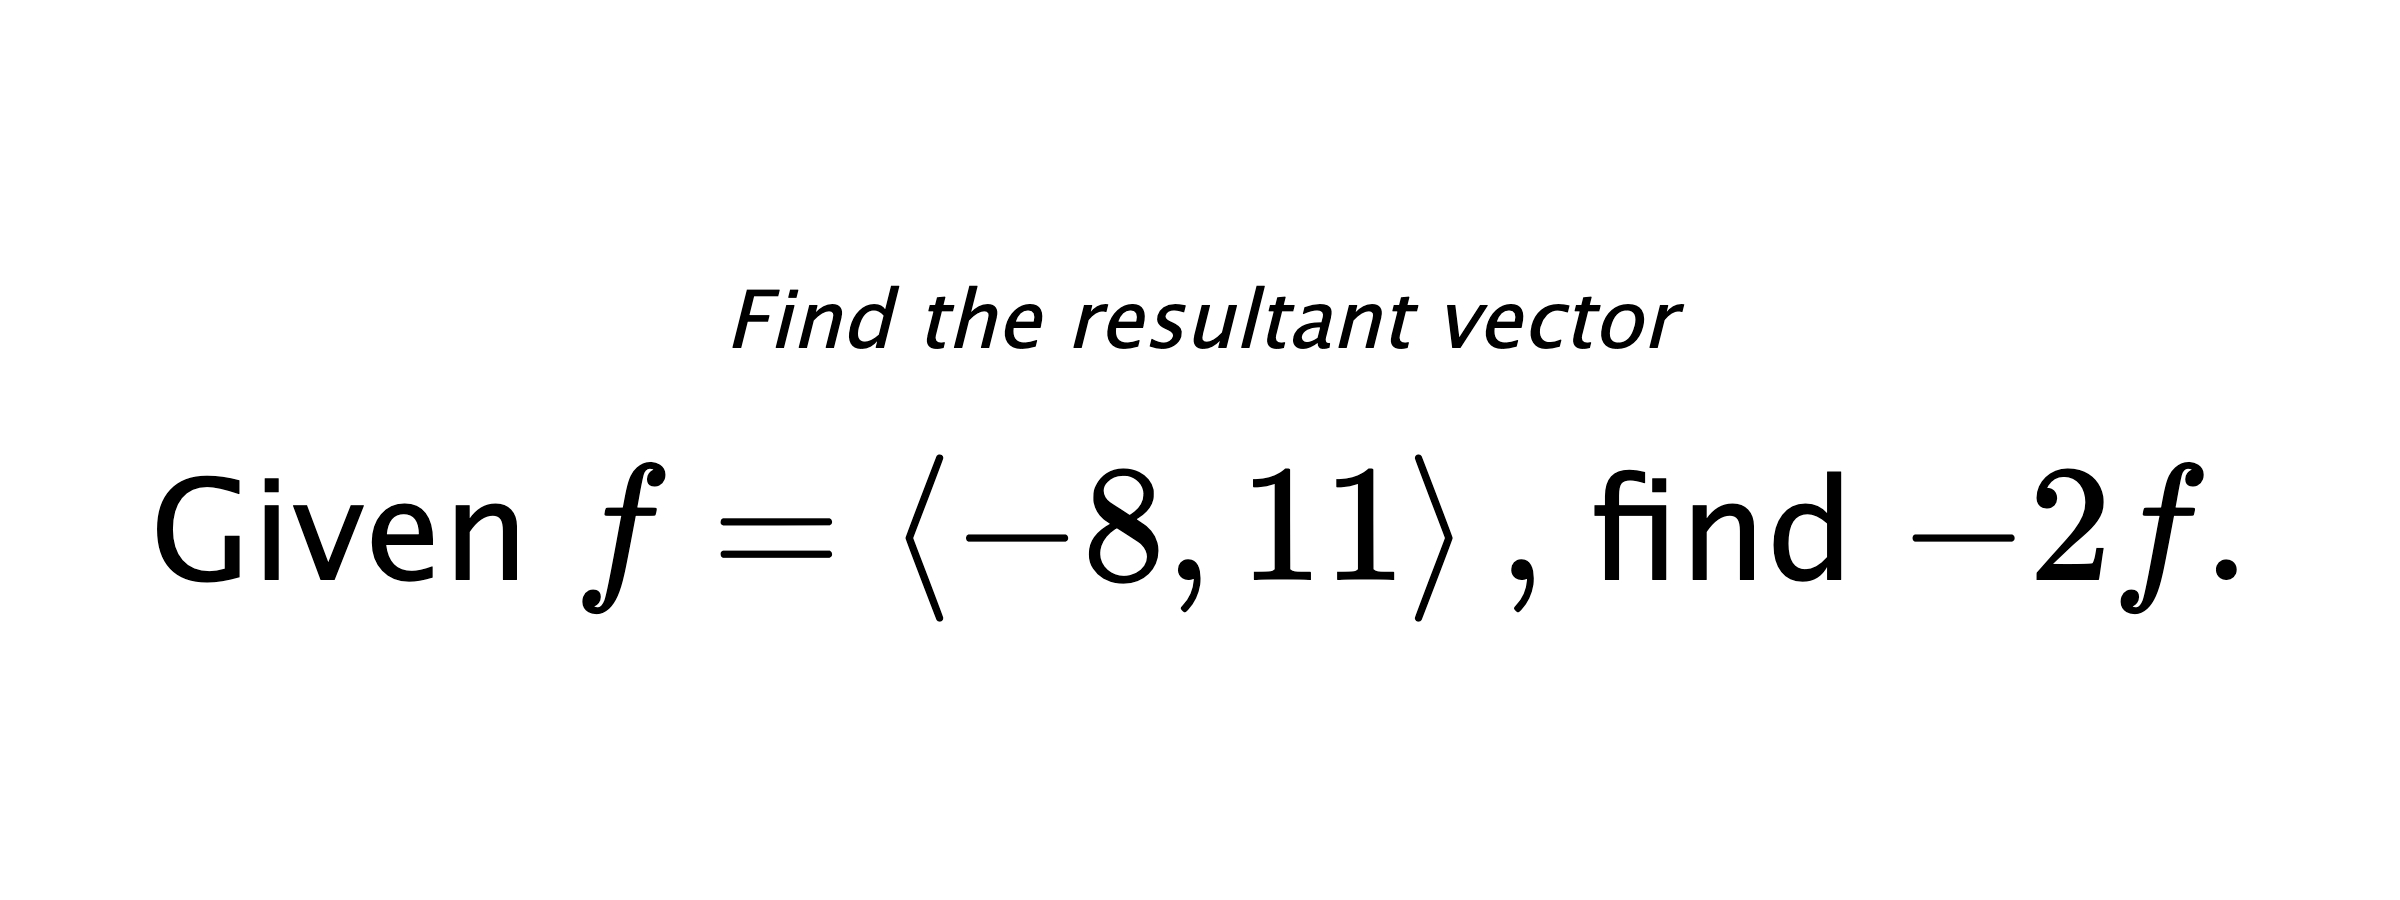 Find the resultant vector Given $ f = \left< -8,11 \right> ,$ find $ -2f .$